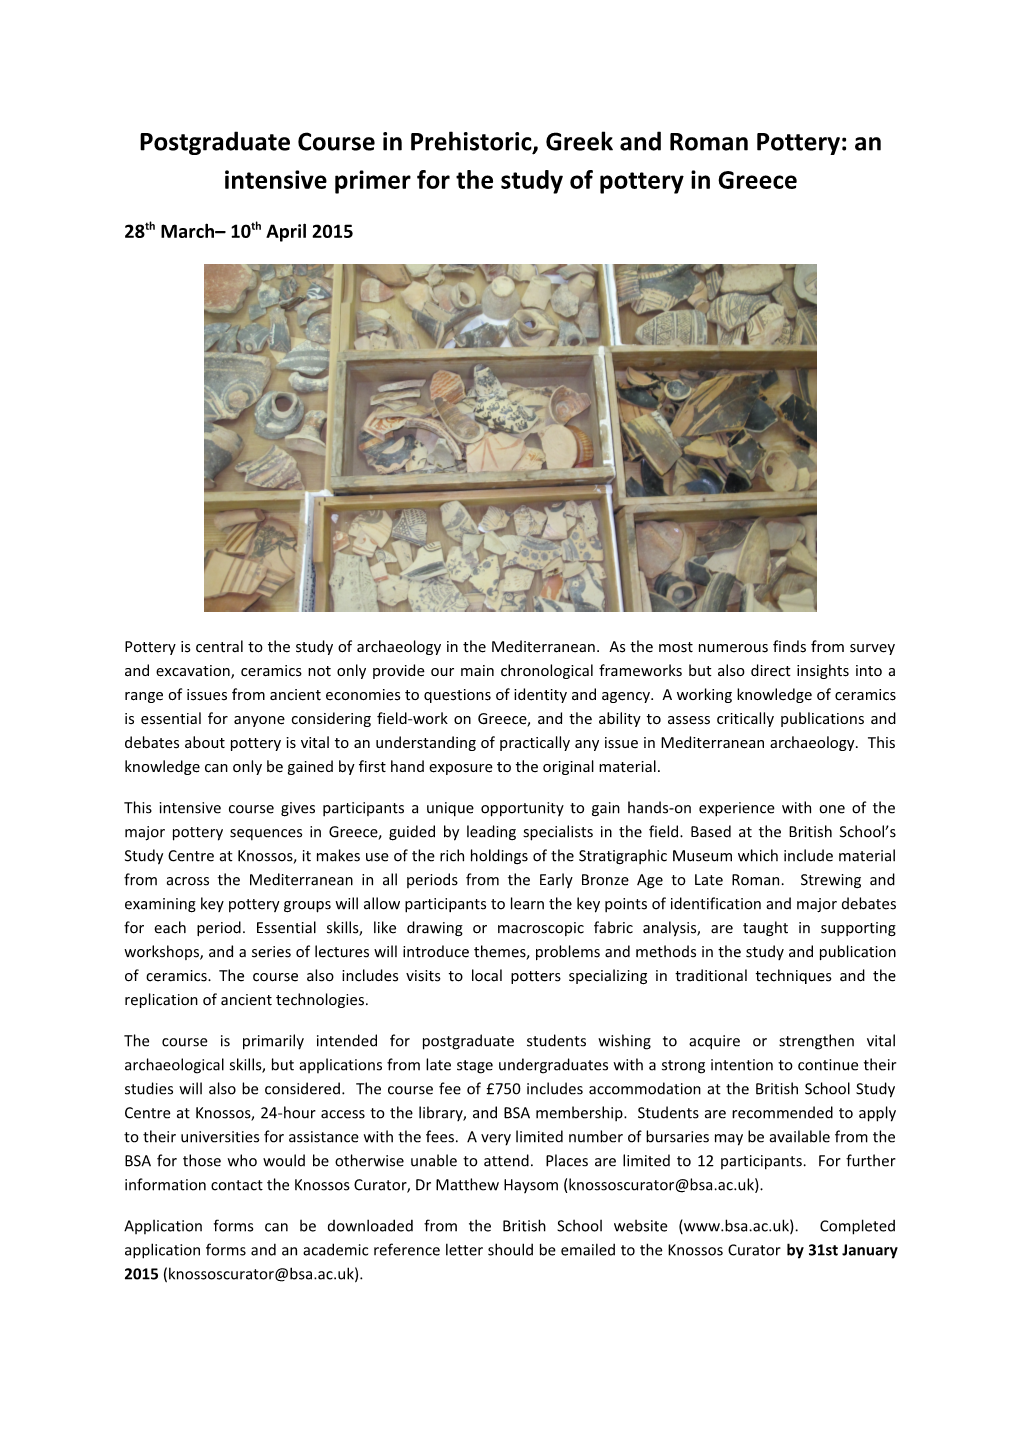 Postgraduate Course in Prehistoric, Greek and Roman Pottery: an Intensive Primer for The